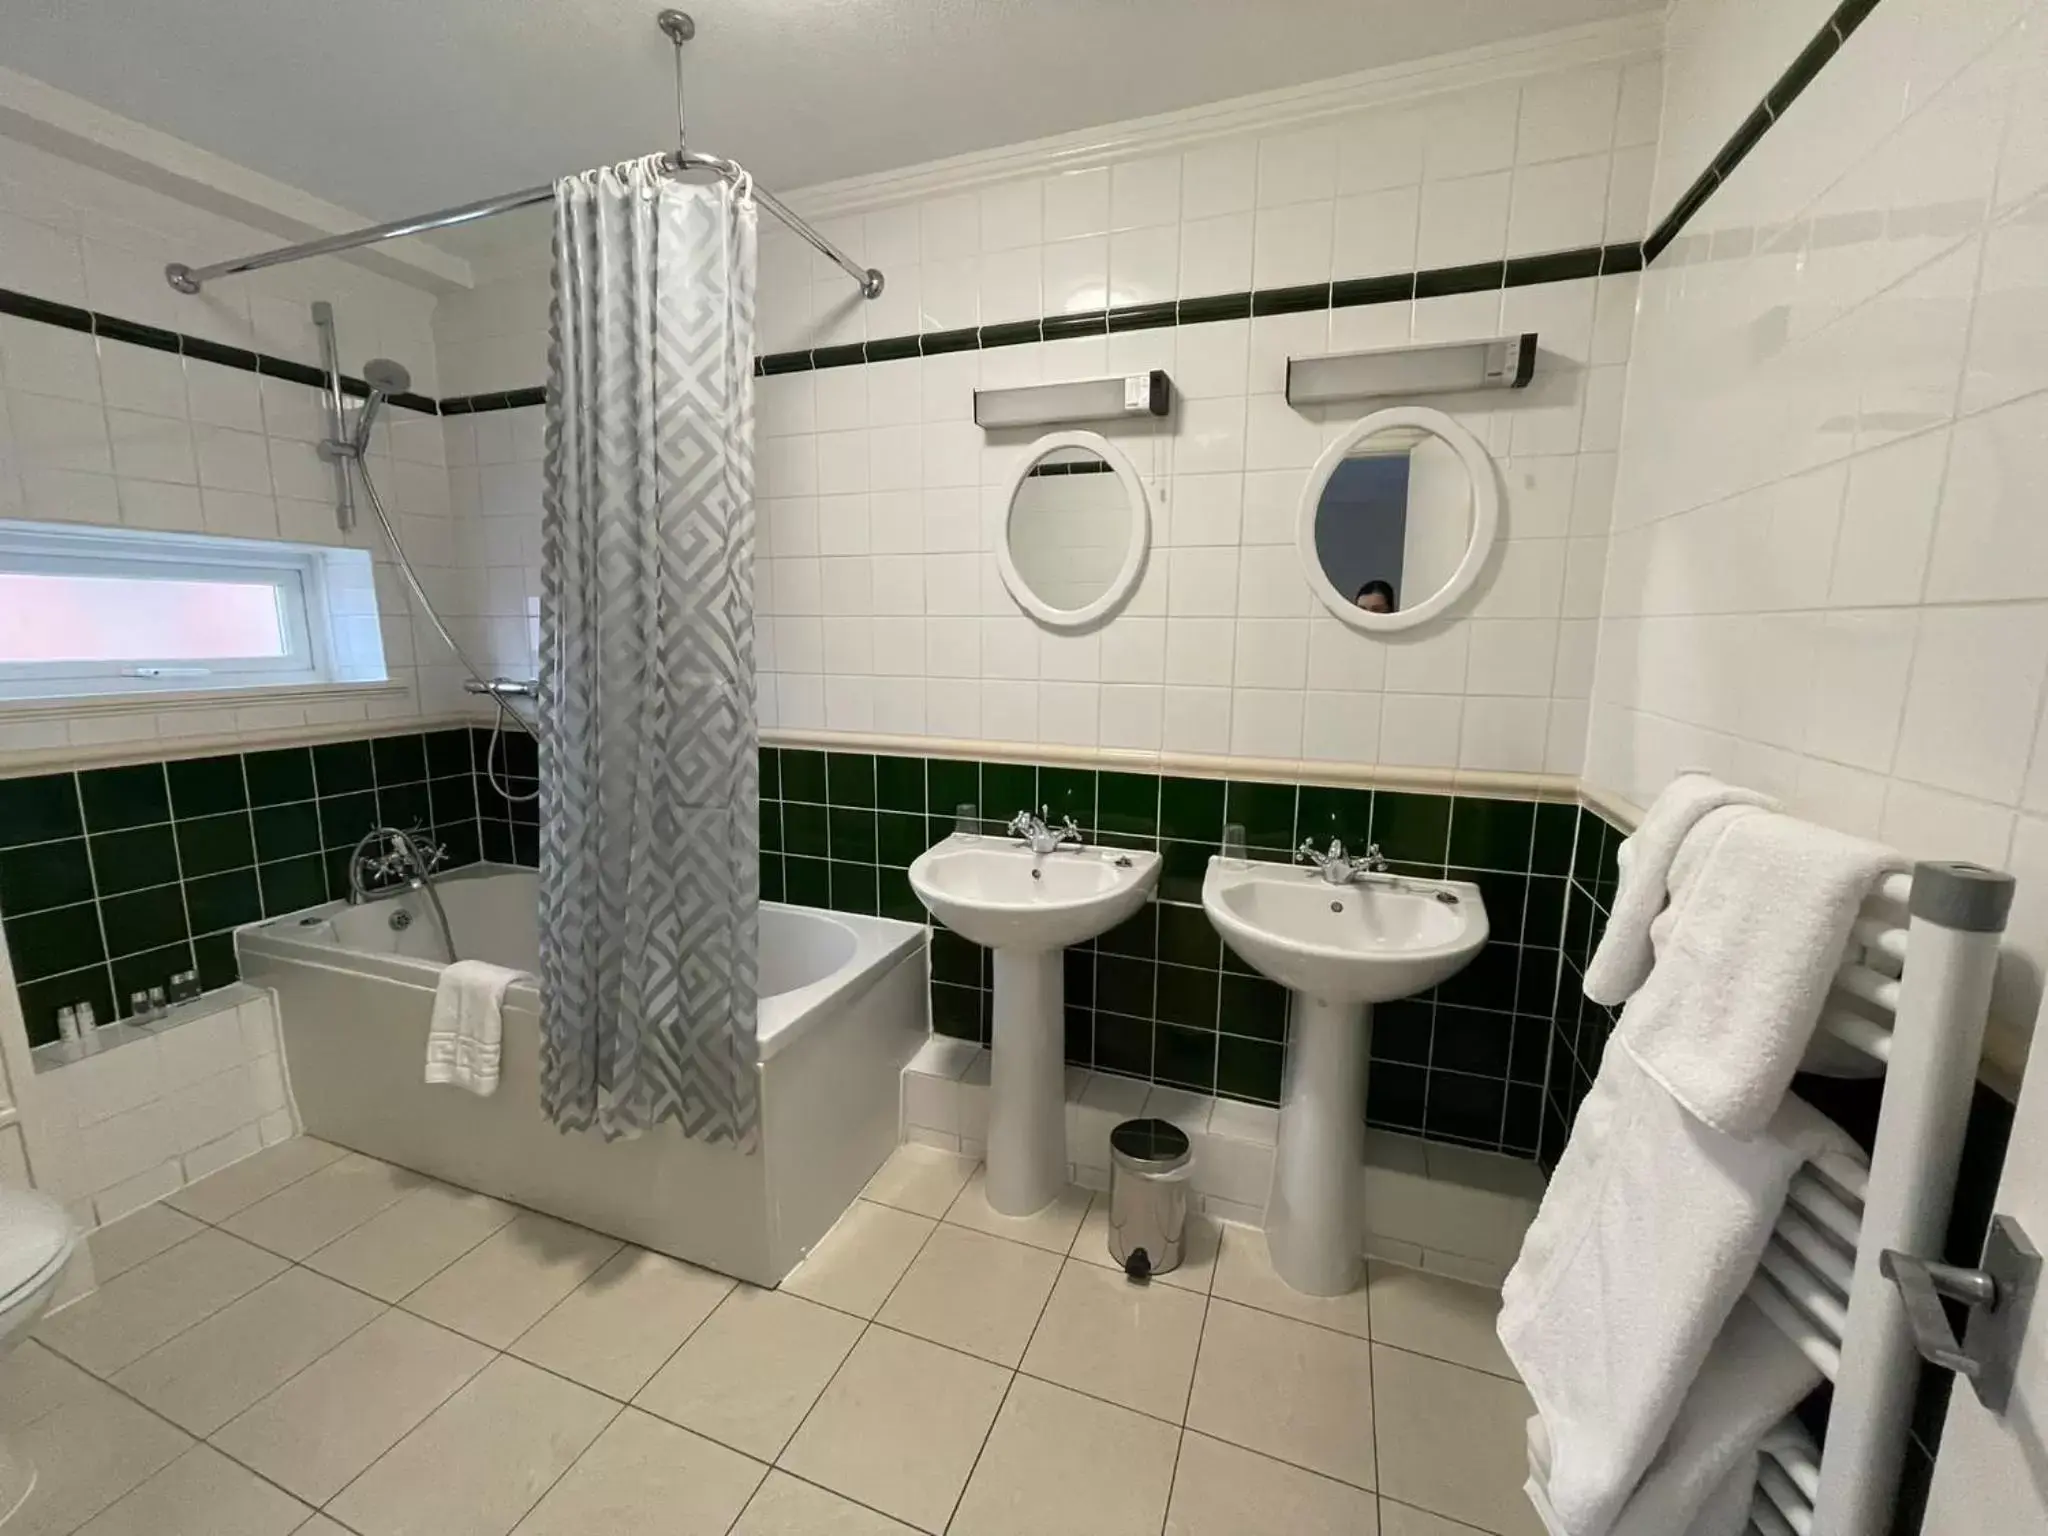 Bathroom in The Continental Hotel, Derby